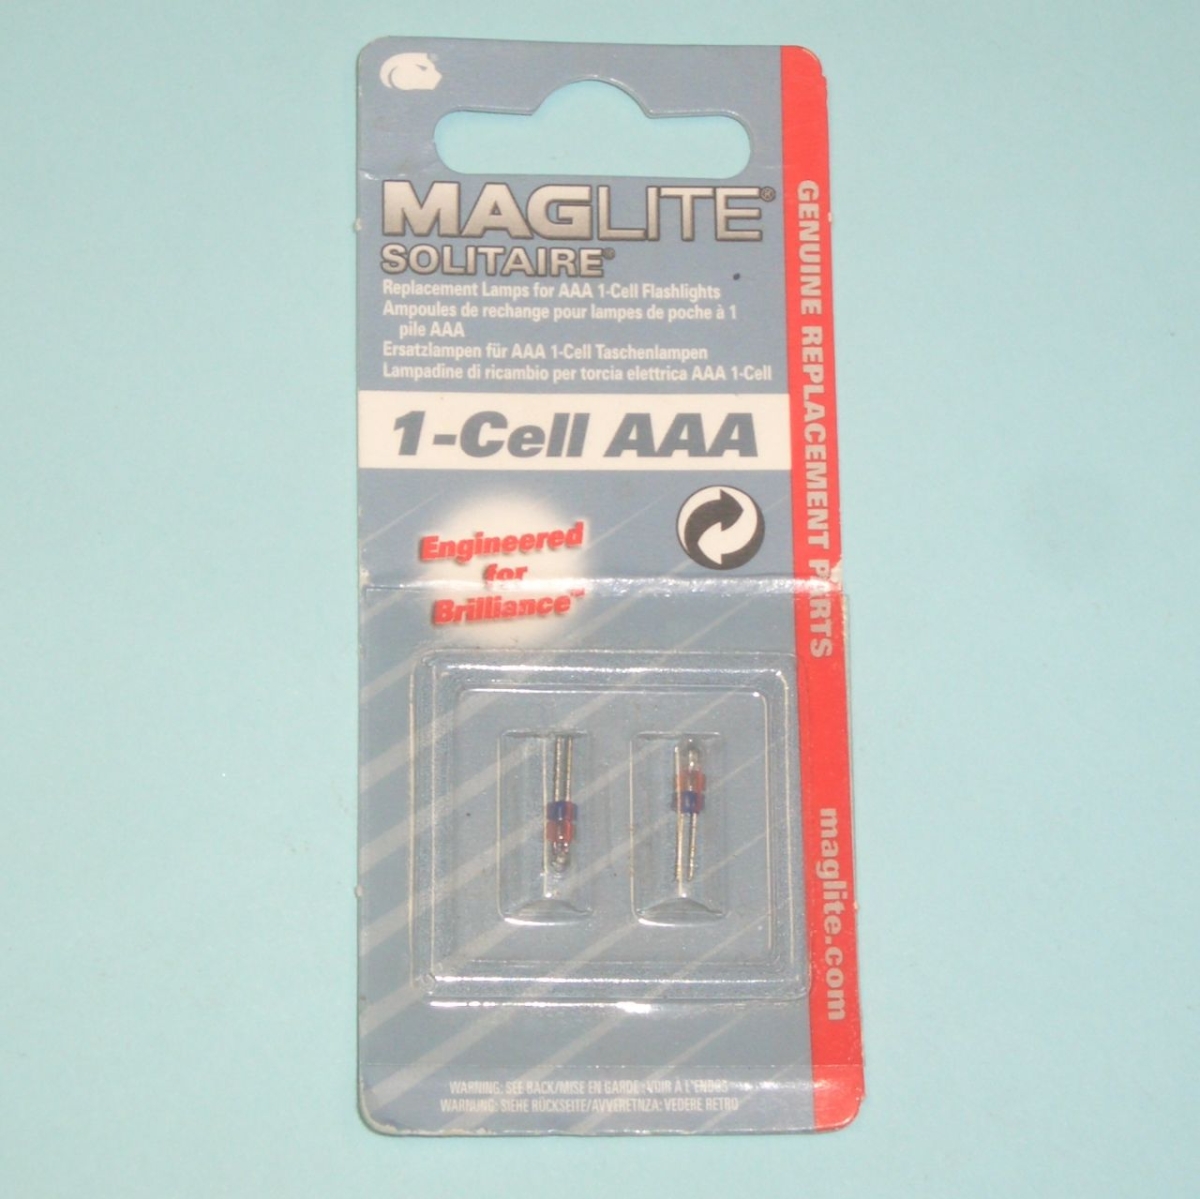 MagLite2 replacement bulbs for MagLite Solitaire AAA LK3A001E-Price for 2 pcs.Article-No: 393505L